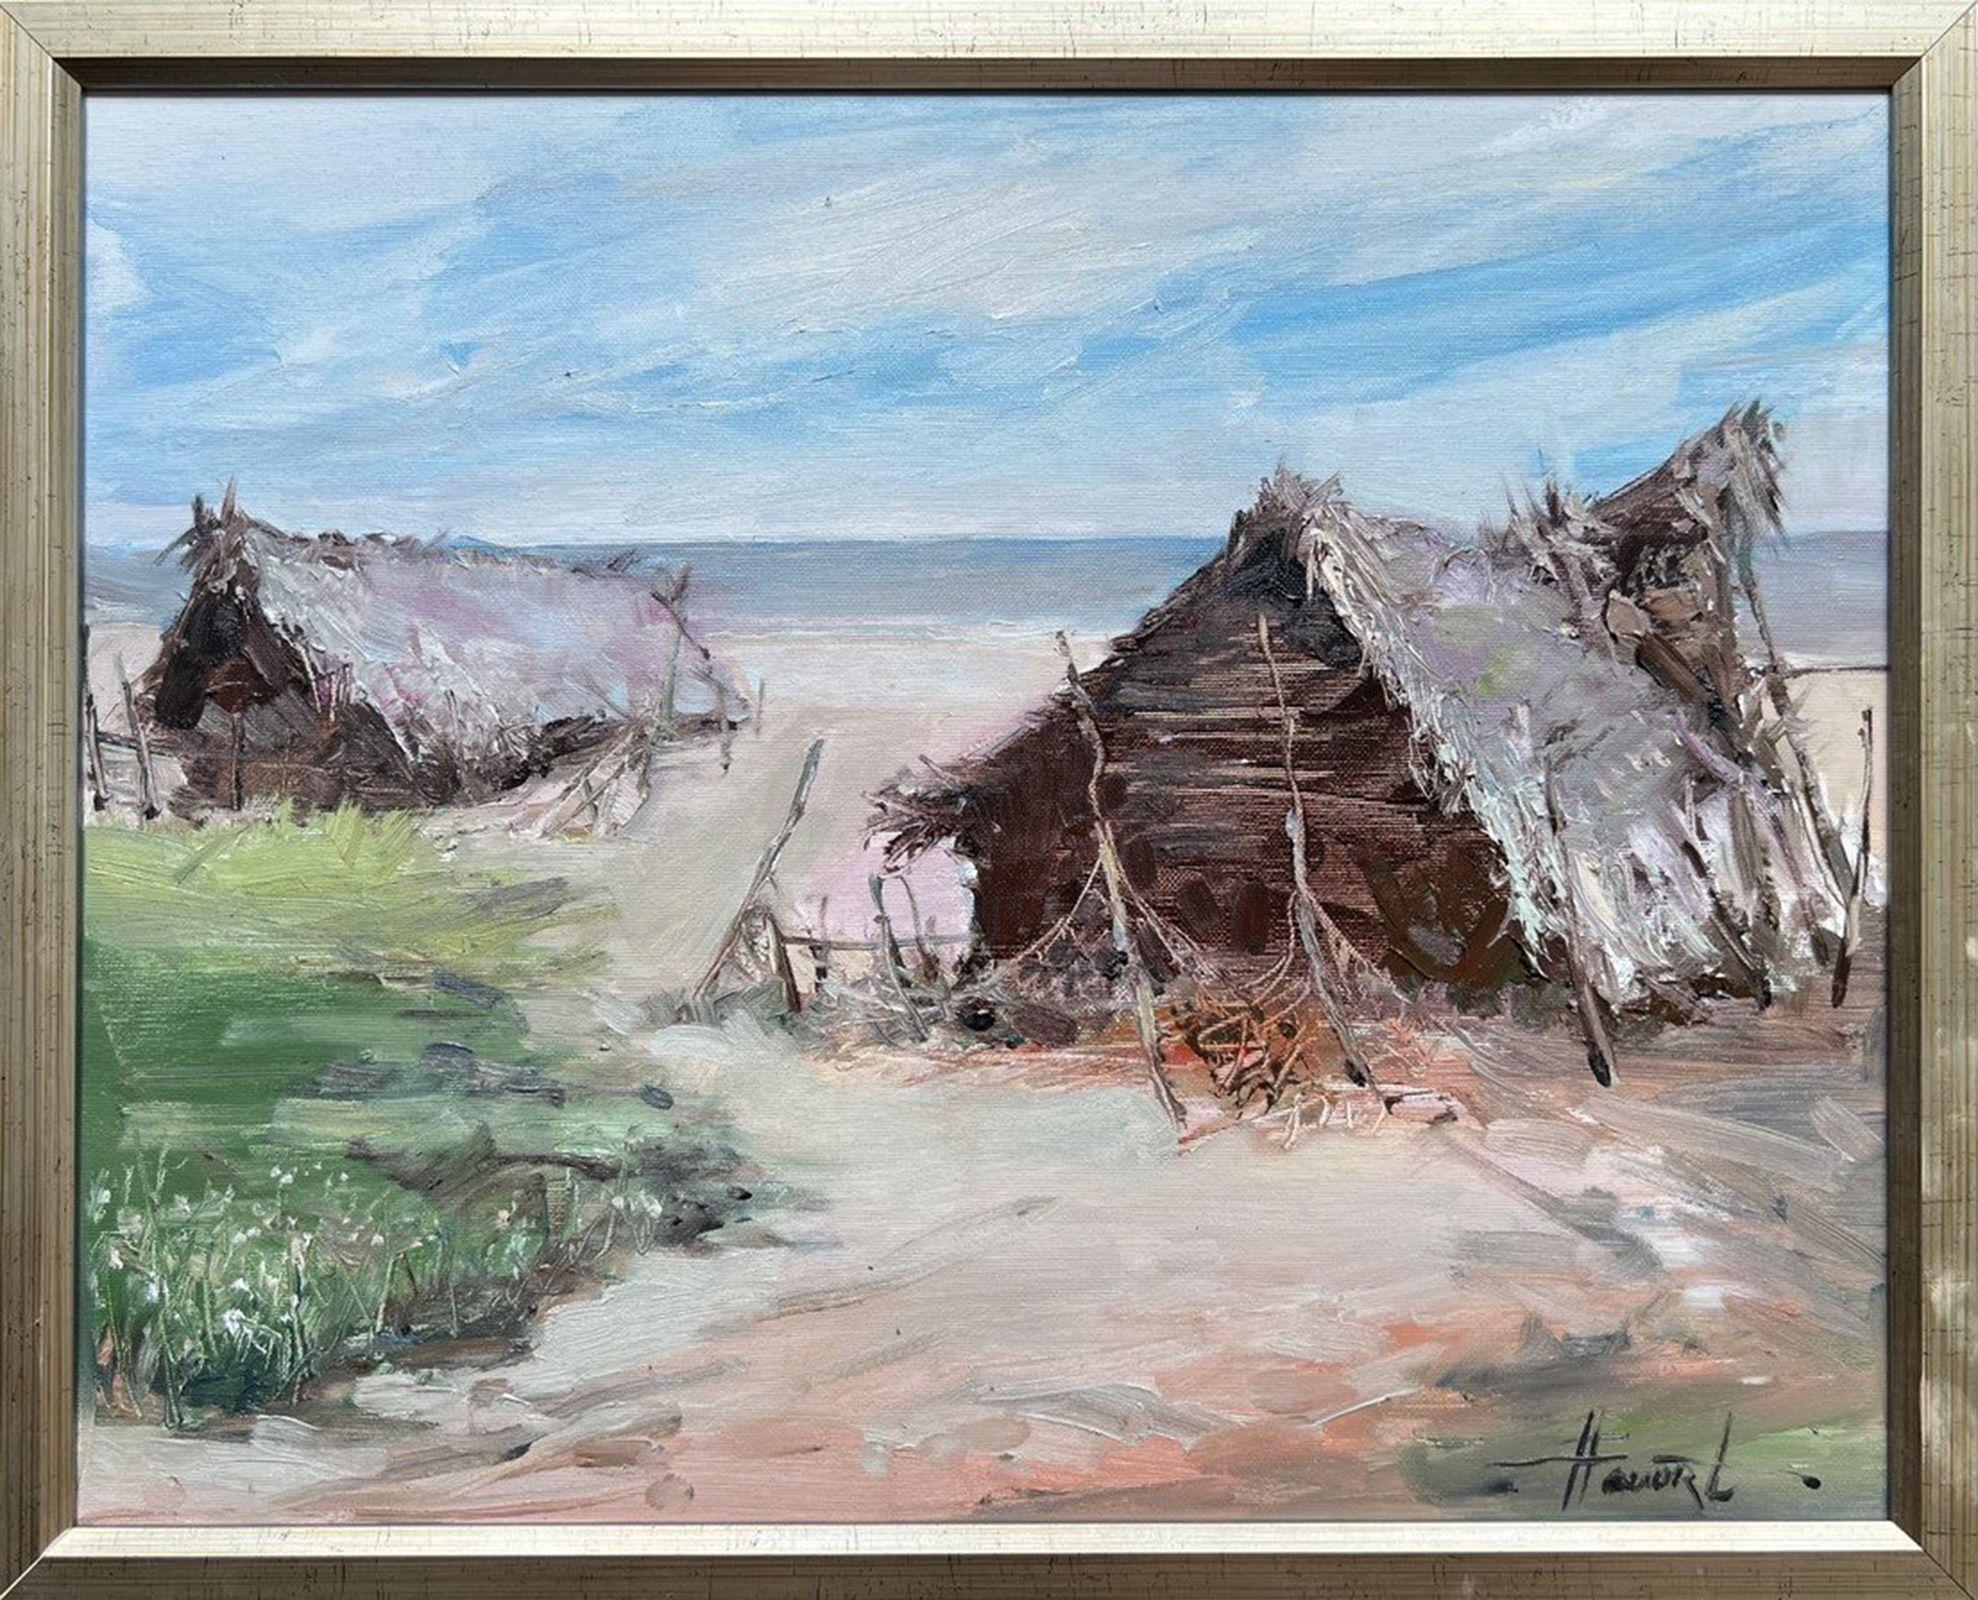 Next landscape from a series of my holidays in Sri Lanka, March 2022.  Original oil painting. Oil on canvas. Signed on the front side and accompanied by a Certificate of Authenticity. The canvas is stretched on a solid wooden frame.  Worldwide